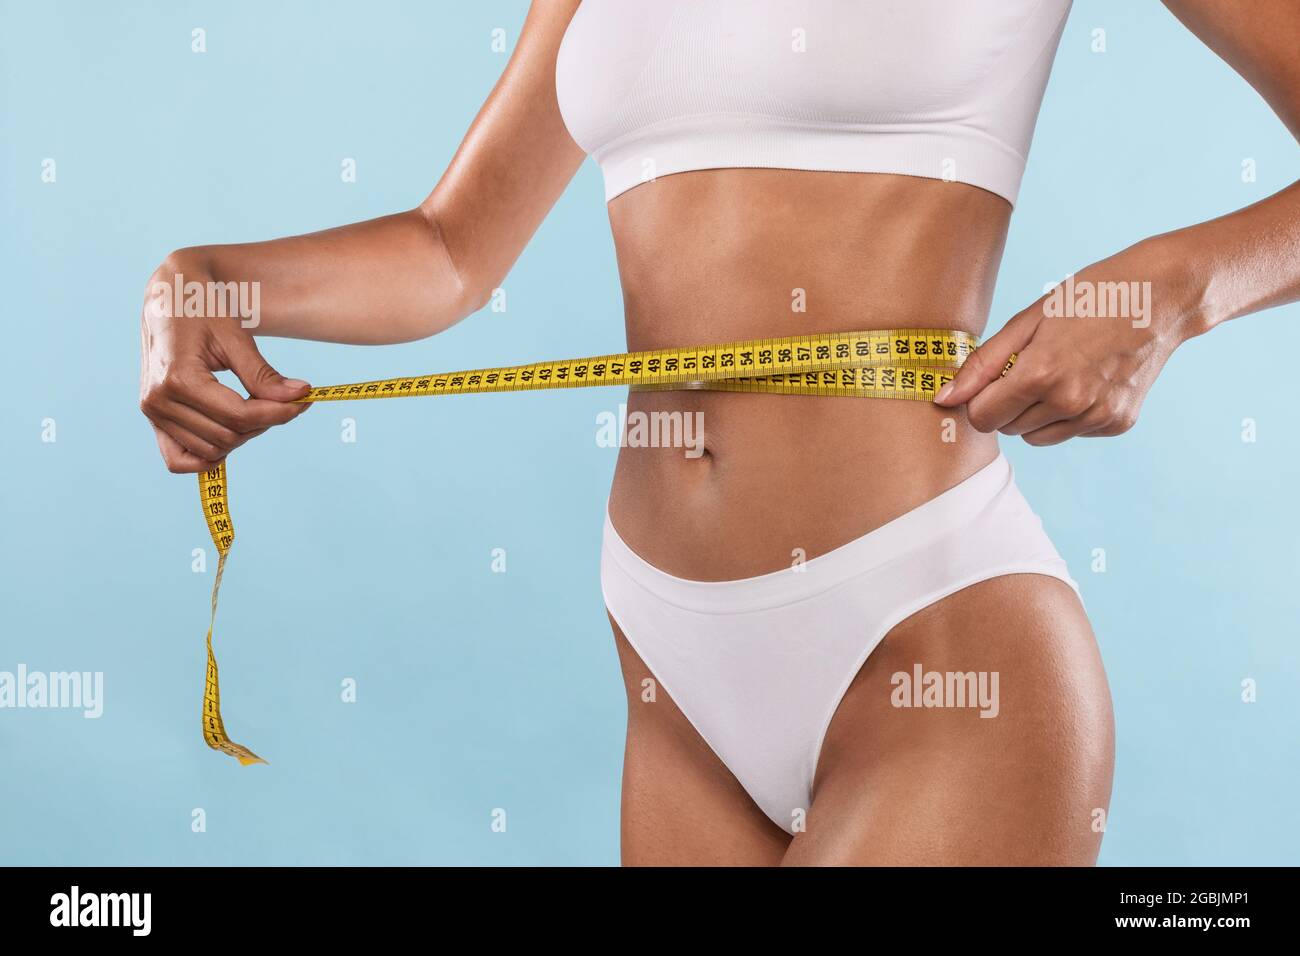 Slim young woman measuring her thin waist with a tape measure, close up  Stock Photo